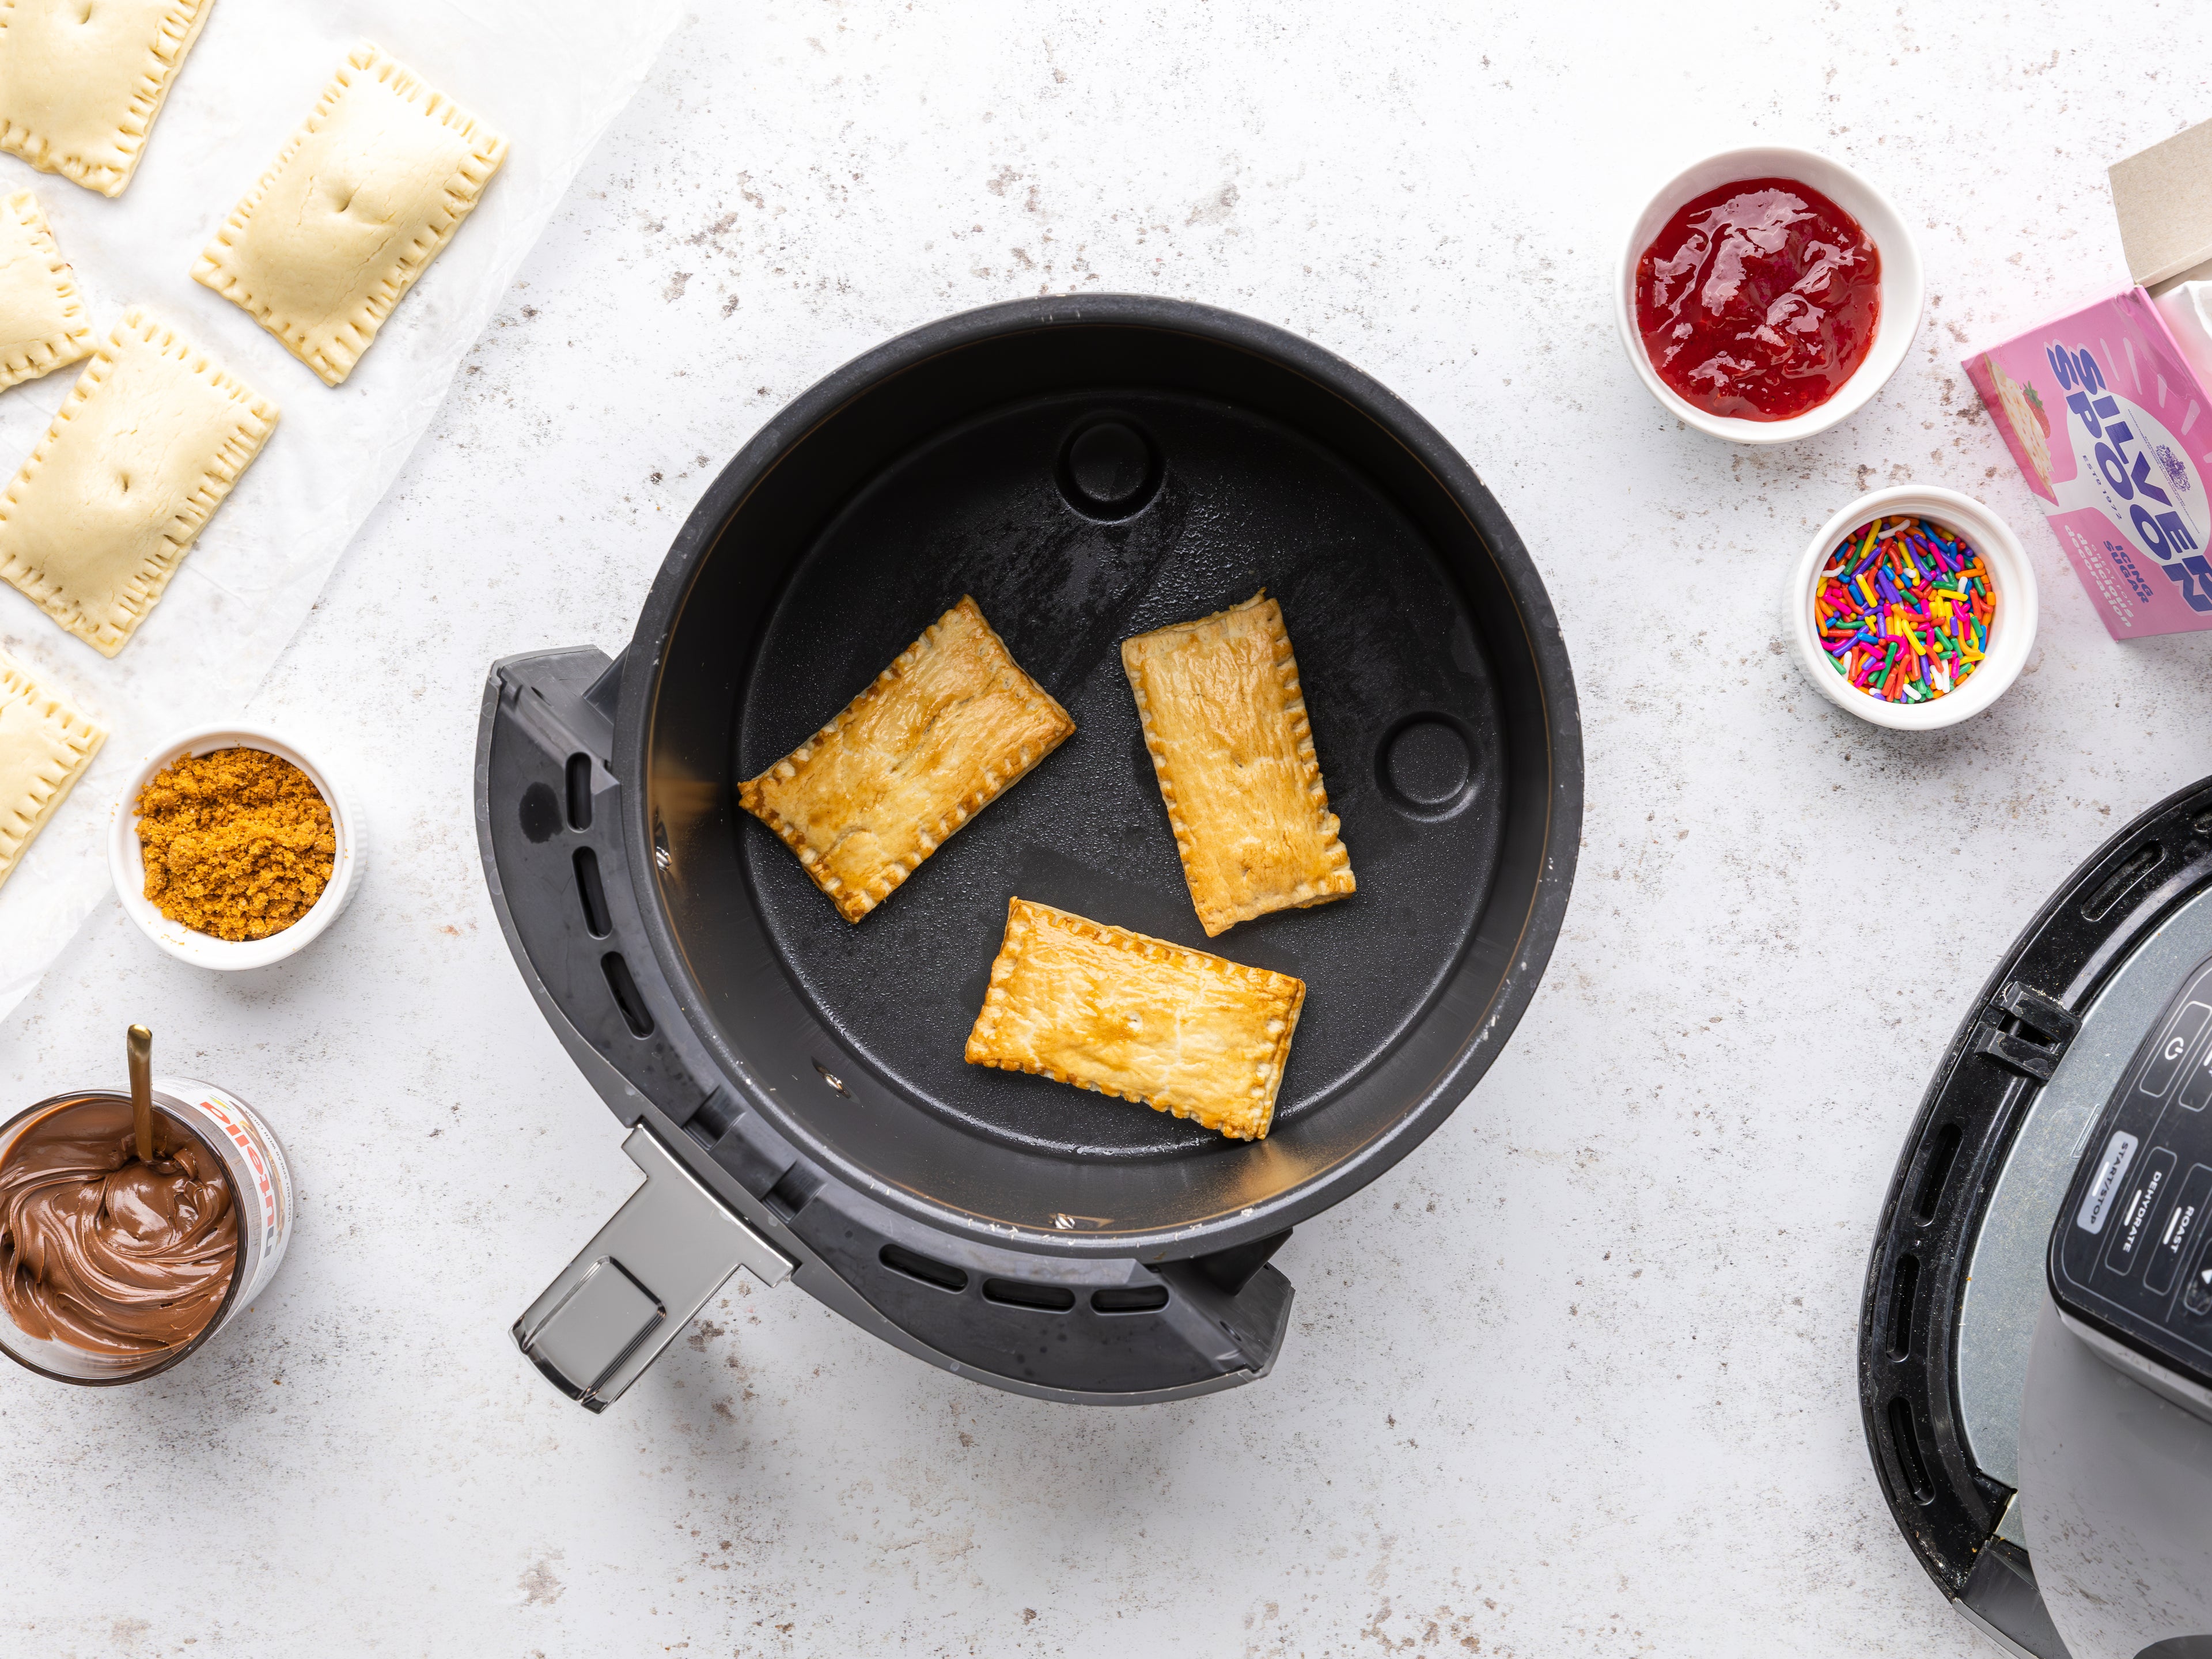 Pop Tarts in an air fryer surrounded by jam, sprinkles and open pack of icing sugar